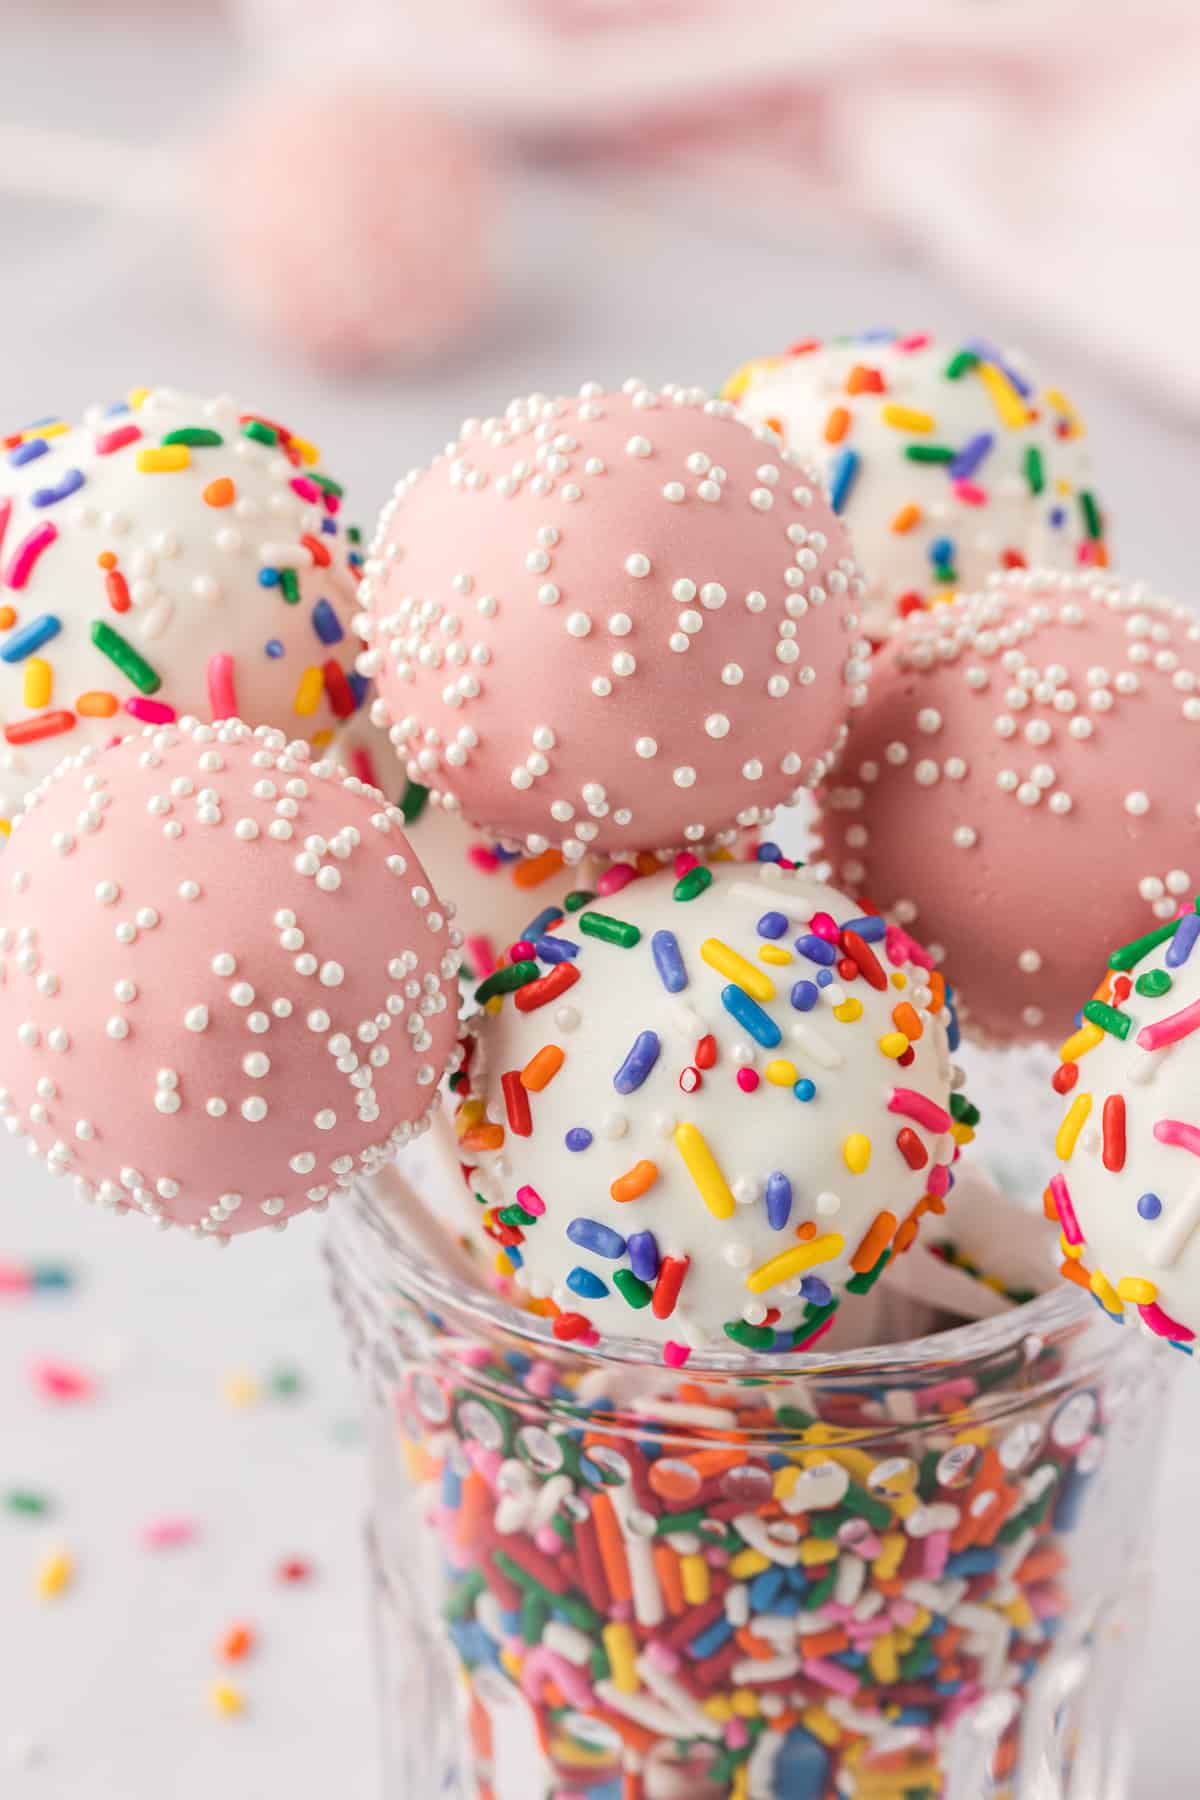 a clear glass jar full of rainbow sprinkles with cake pops stuck in the top, some white with rainbow sprinkles and some pink with white sprinkles